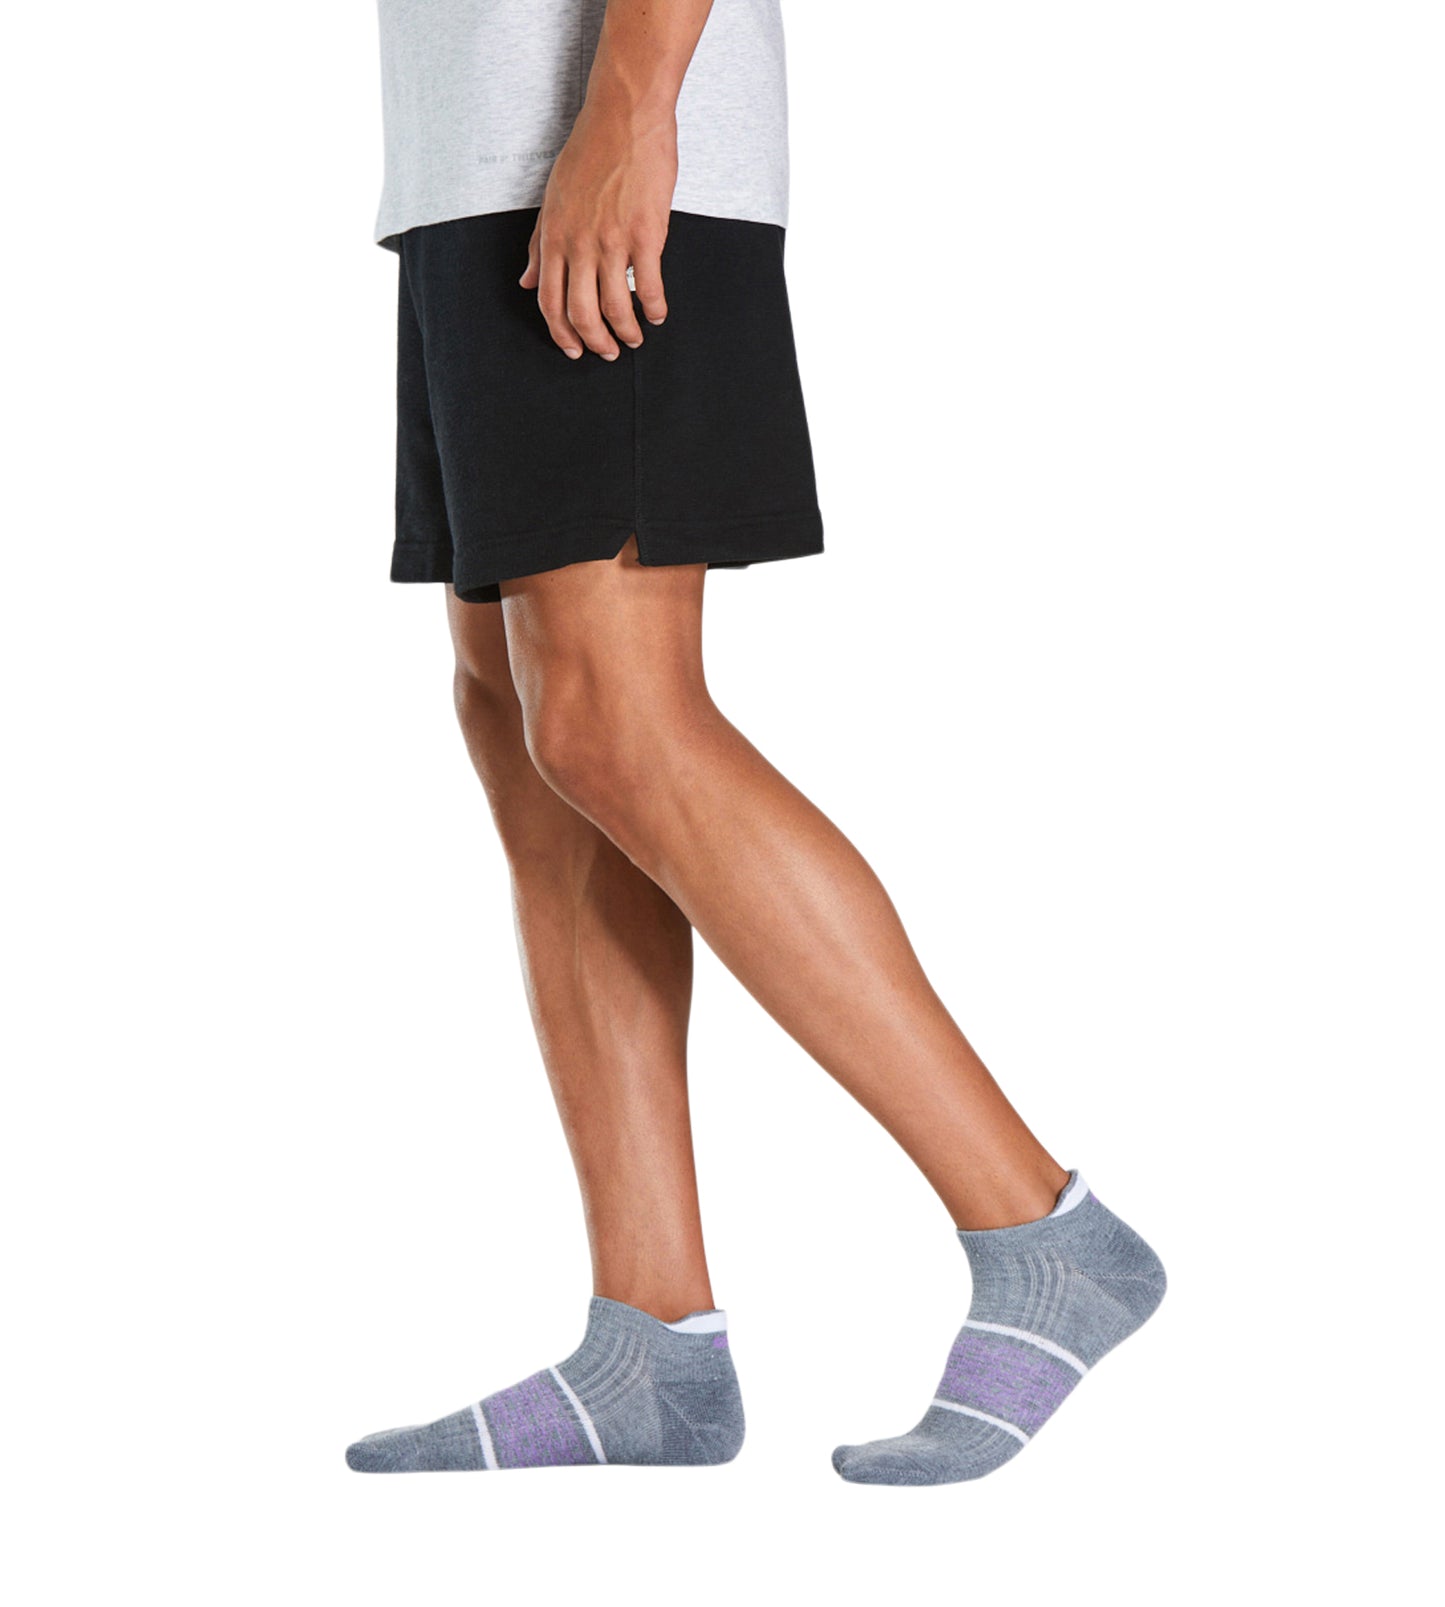 Every Day Kit Cushion Low-Cut Socks With Tab 6 Pack colors contain: Sienna, Black, Dark salmon, Dark Gray, Gains boro, Dark salmon, Slate gray, Saddle brown, Indian red